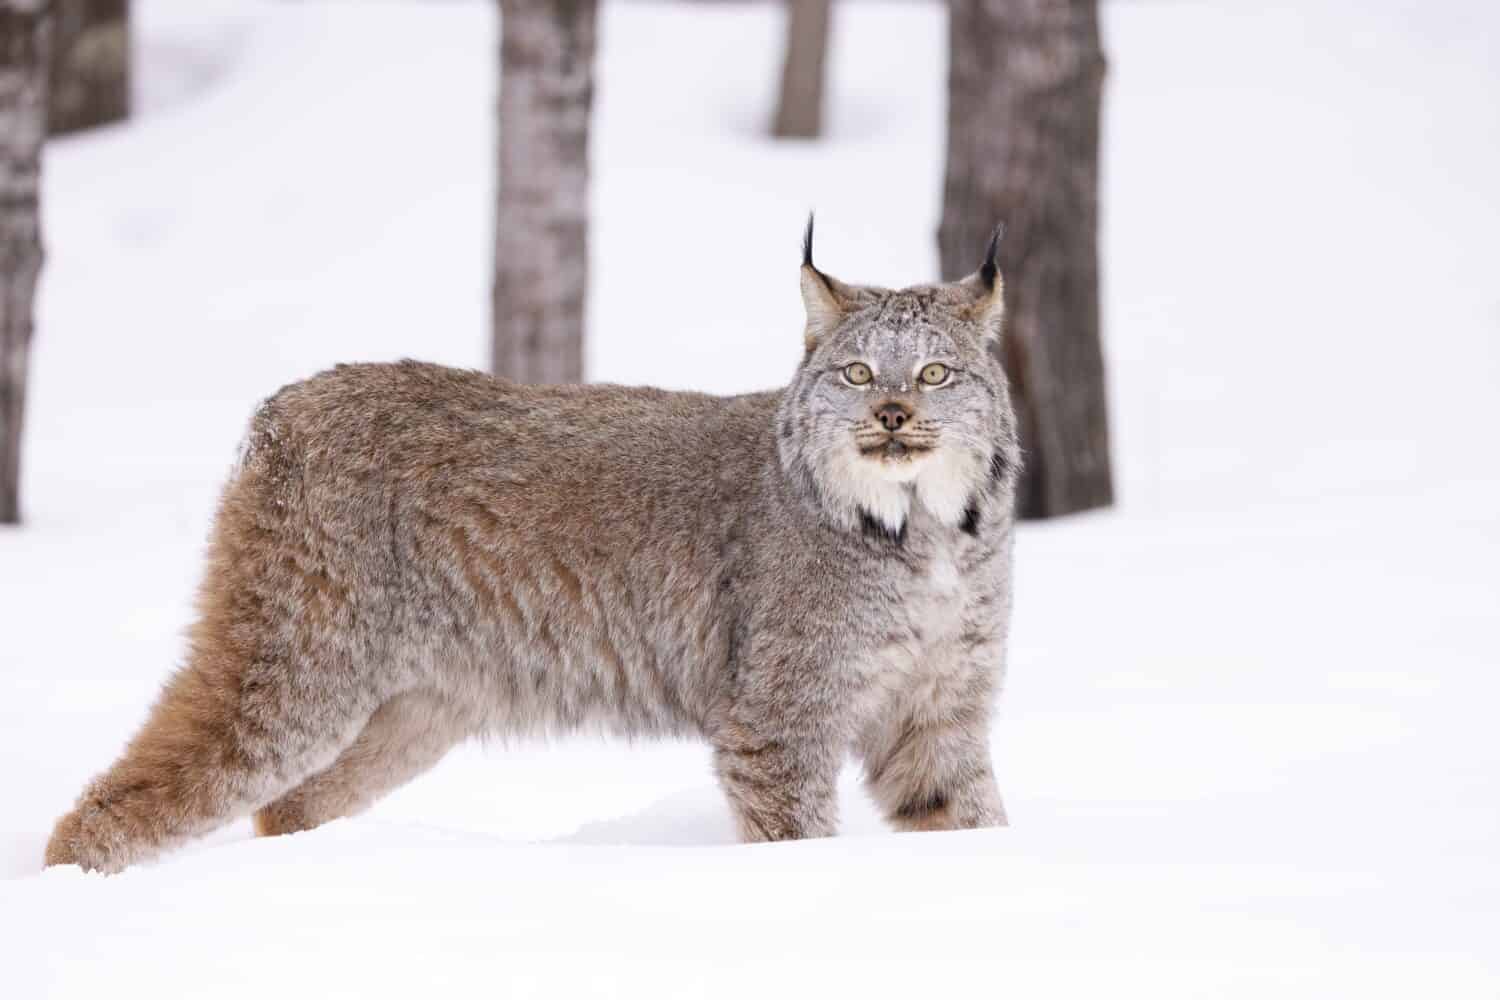 Discover The 15 Most Harmless Wild Animals in Canada - A-Z Animals